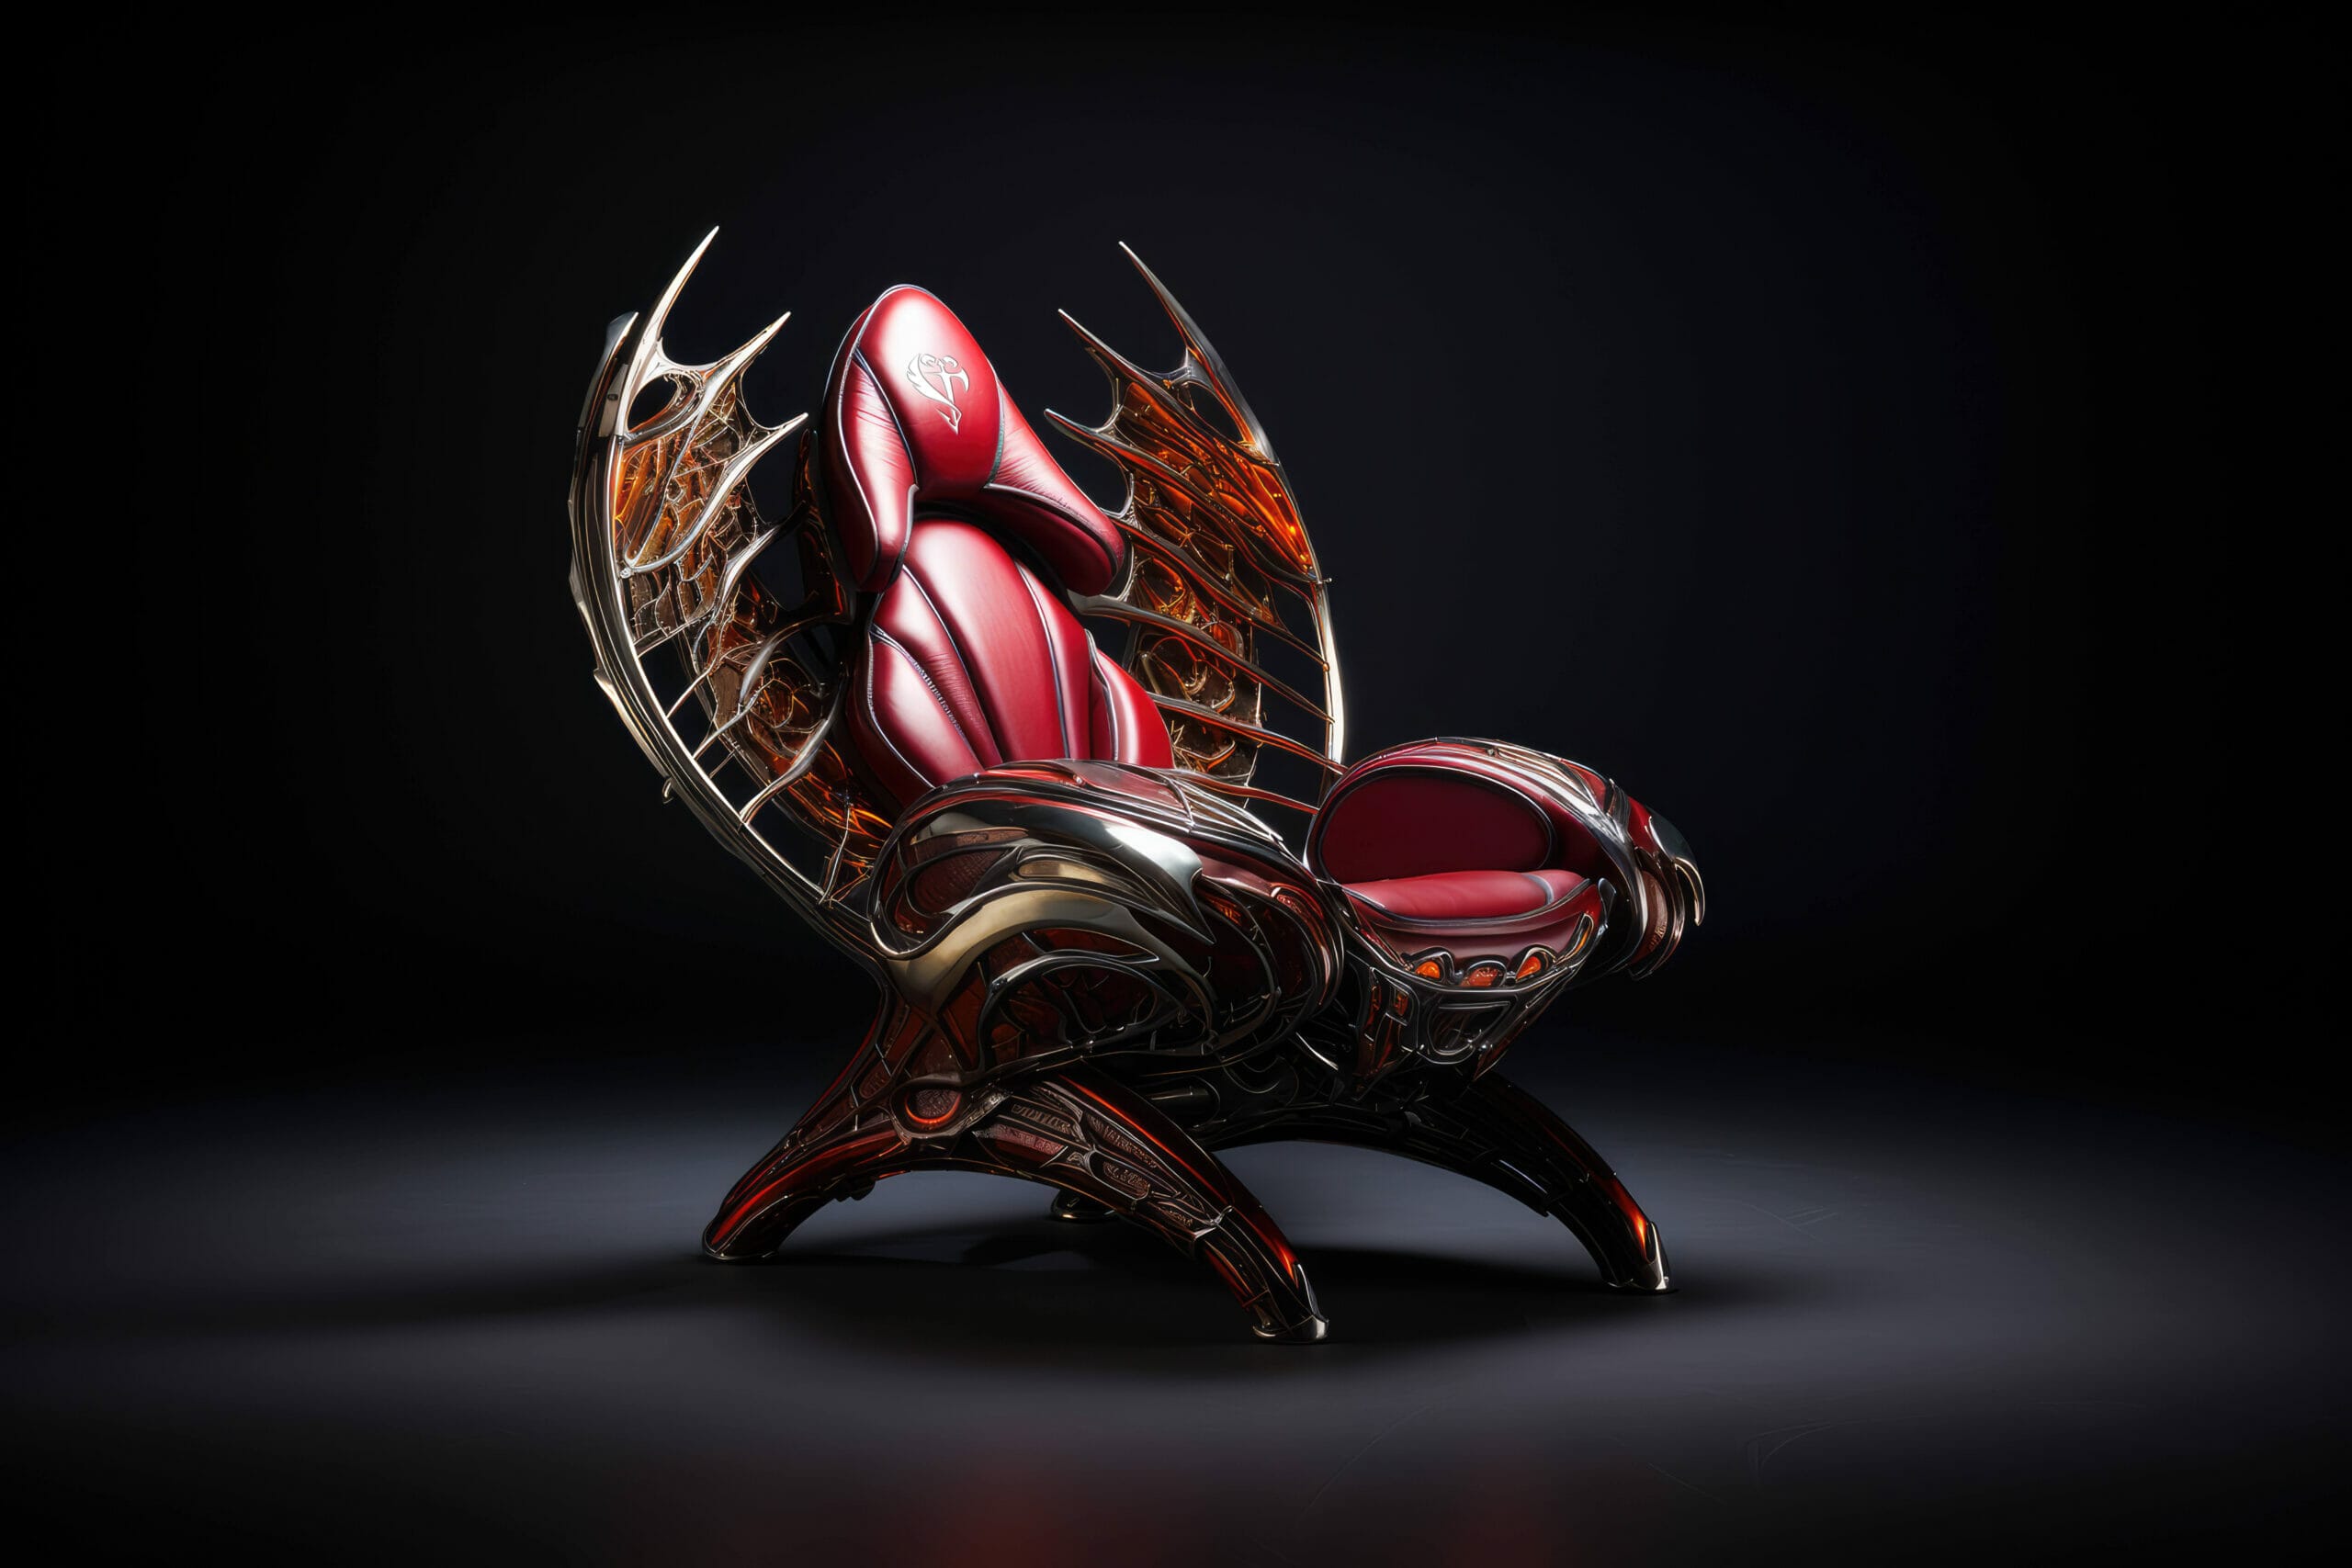 Devil May Cry inspired gaming chair